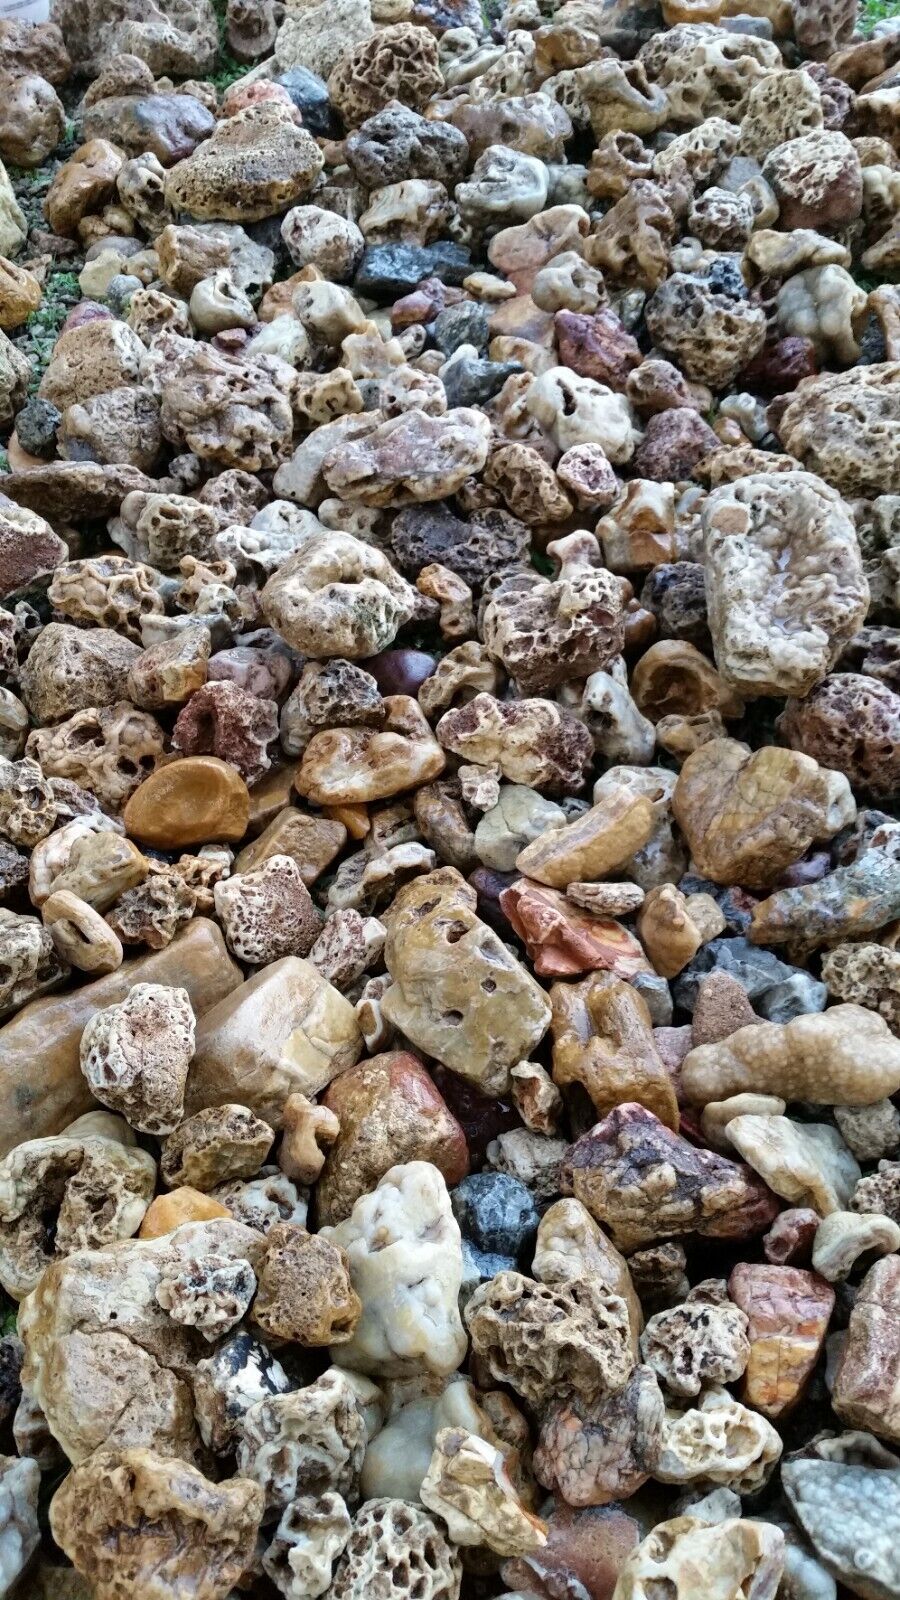 unique natural creek rock river stone substrate in bulk for crafts or collection